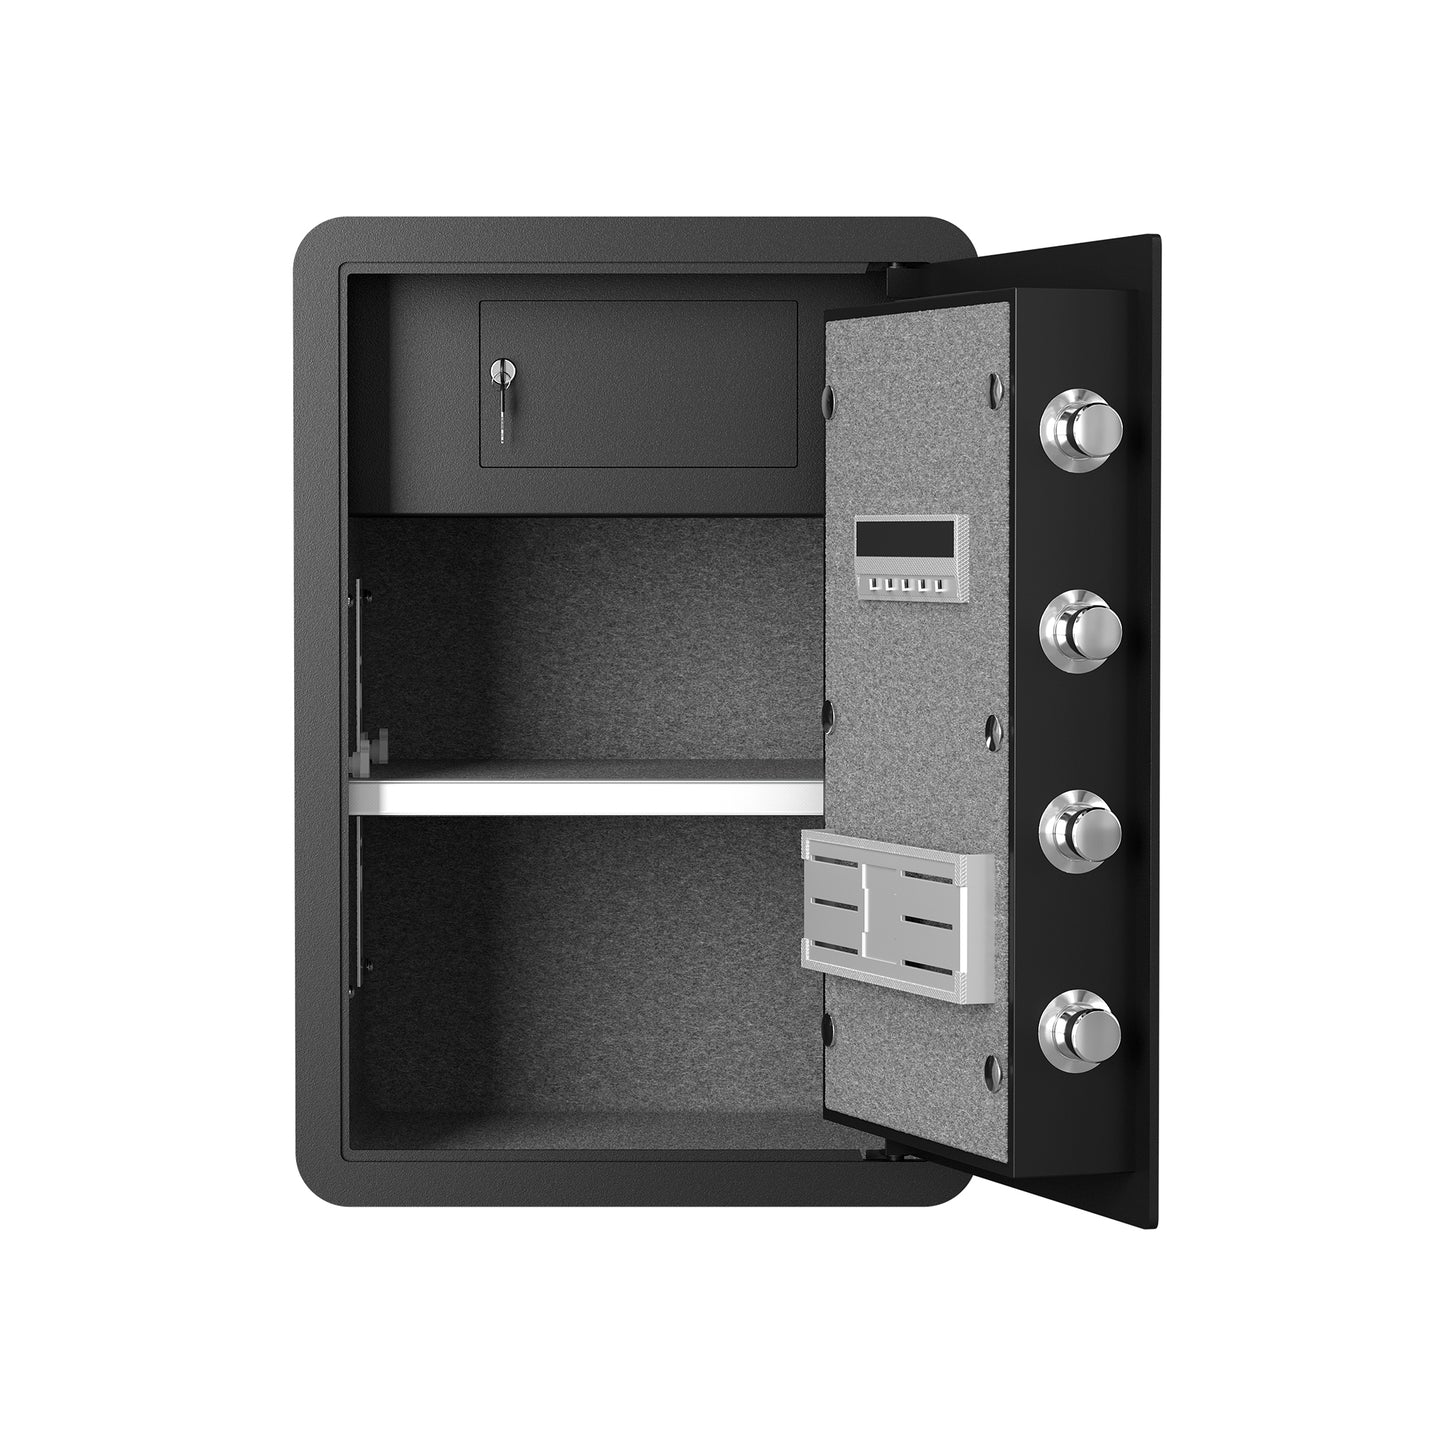 High Security Large-sized Safe Box, 2.5 Cub Feet Safe with Electronic Password Lock,Safe with Private Inner Cabinet for Home,Office and Hotel